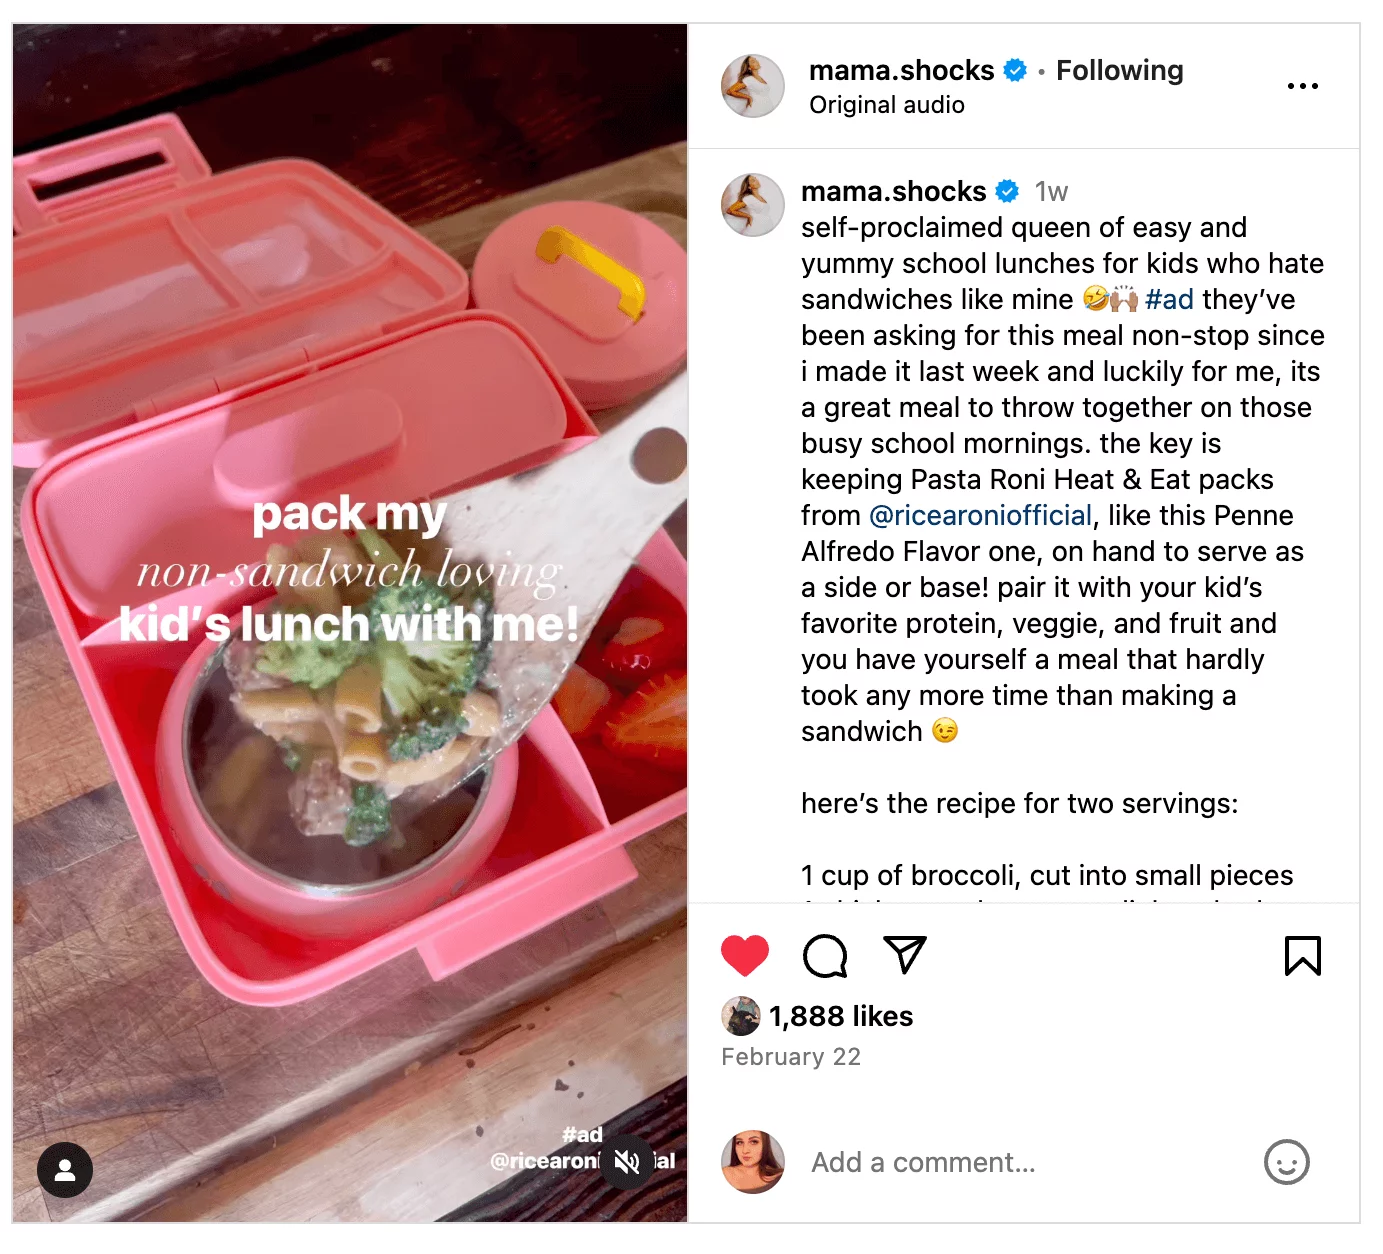 Mama.shocks shares a kid-friendly lunch recipe on Instagram, featuring a pasta meal in a colorful lunchbox